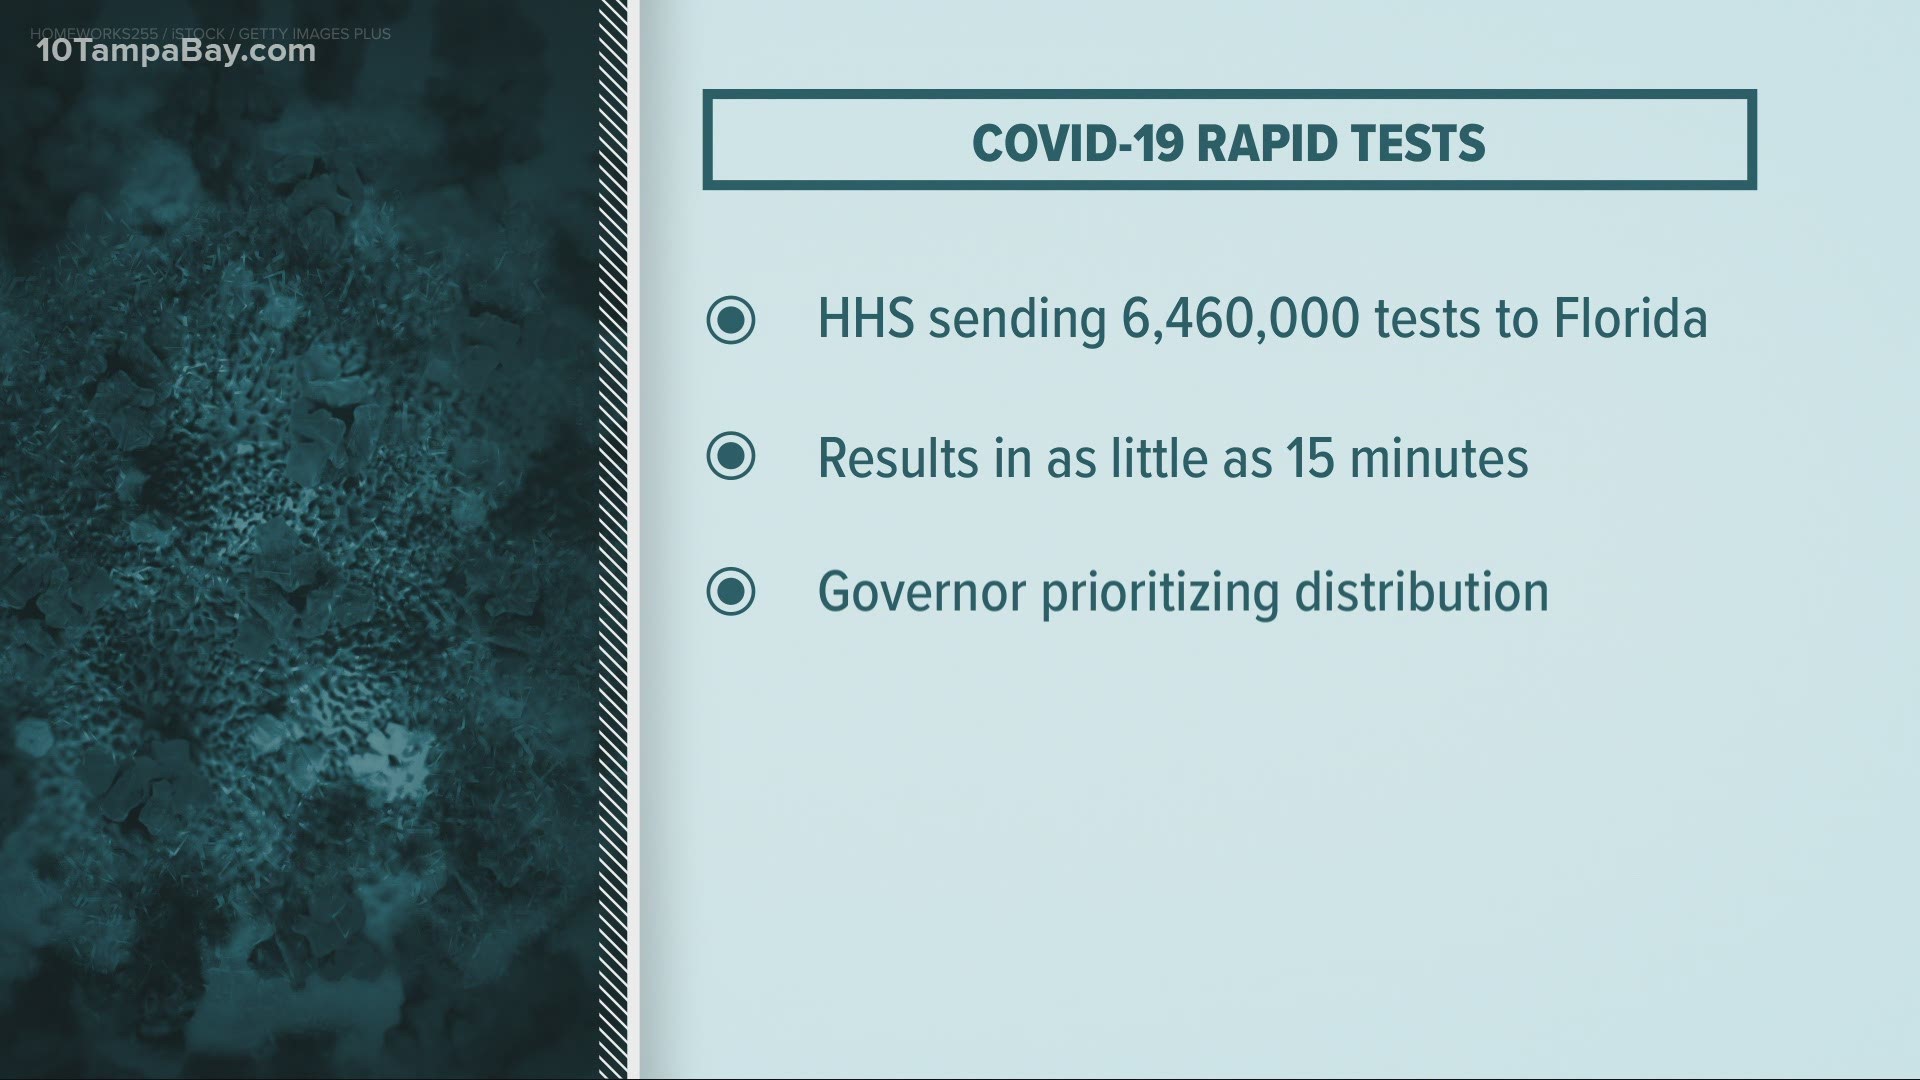 The tests are said to be part of the Trump administration's national effort to fight COVID-19.